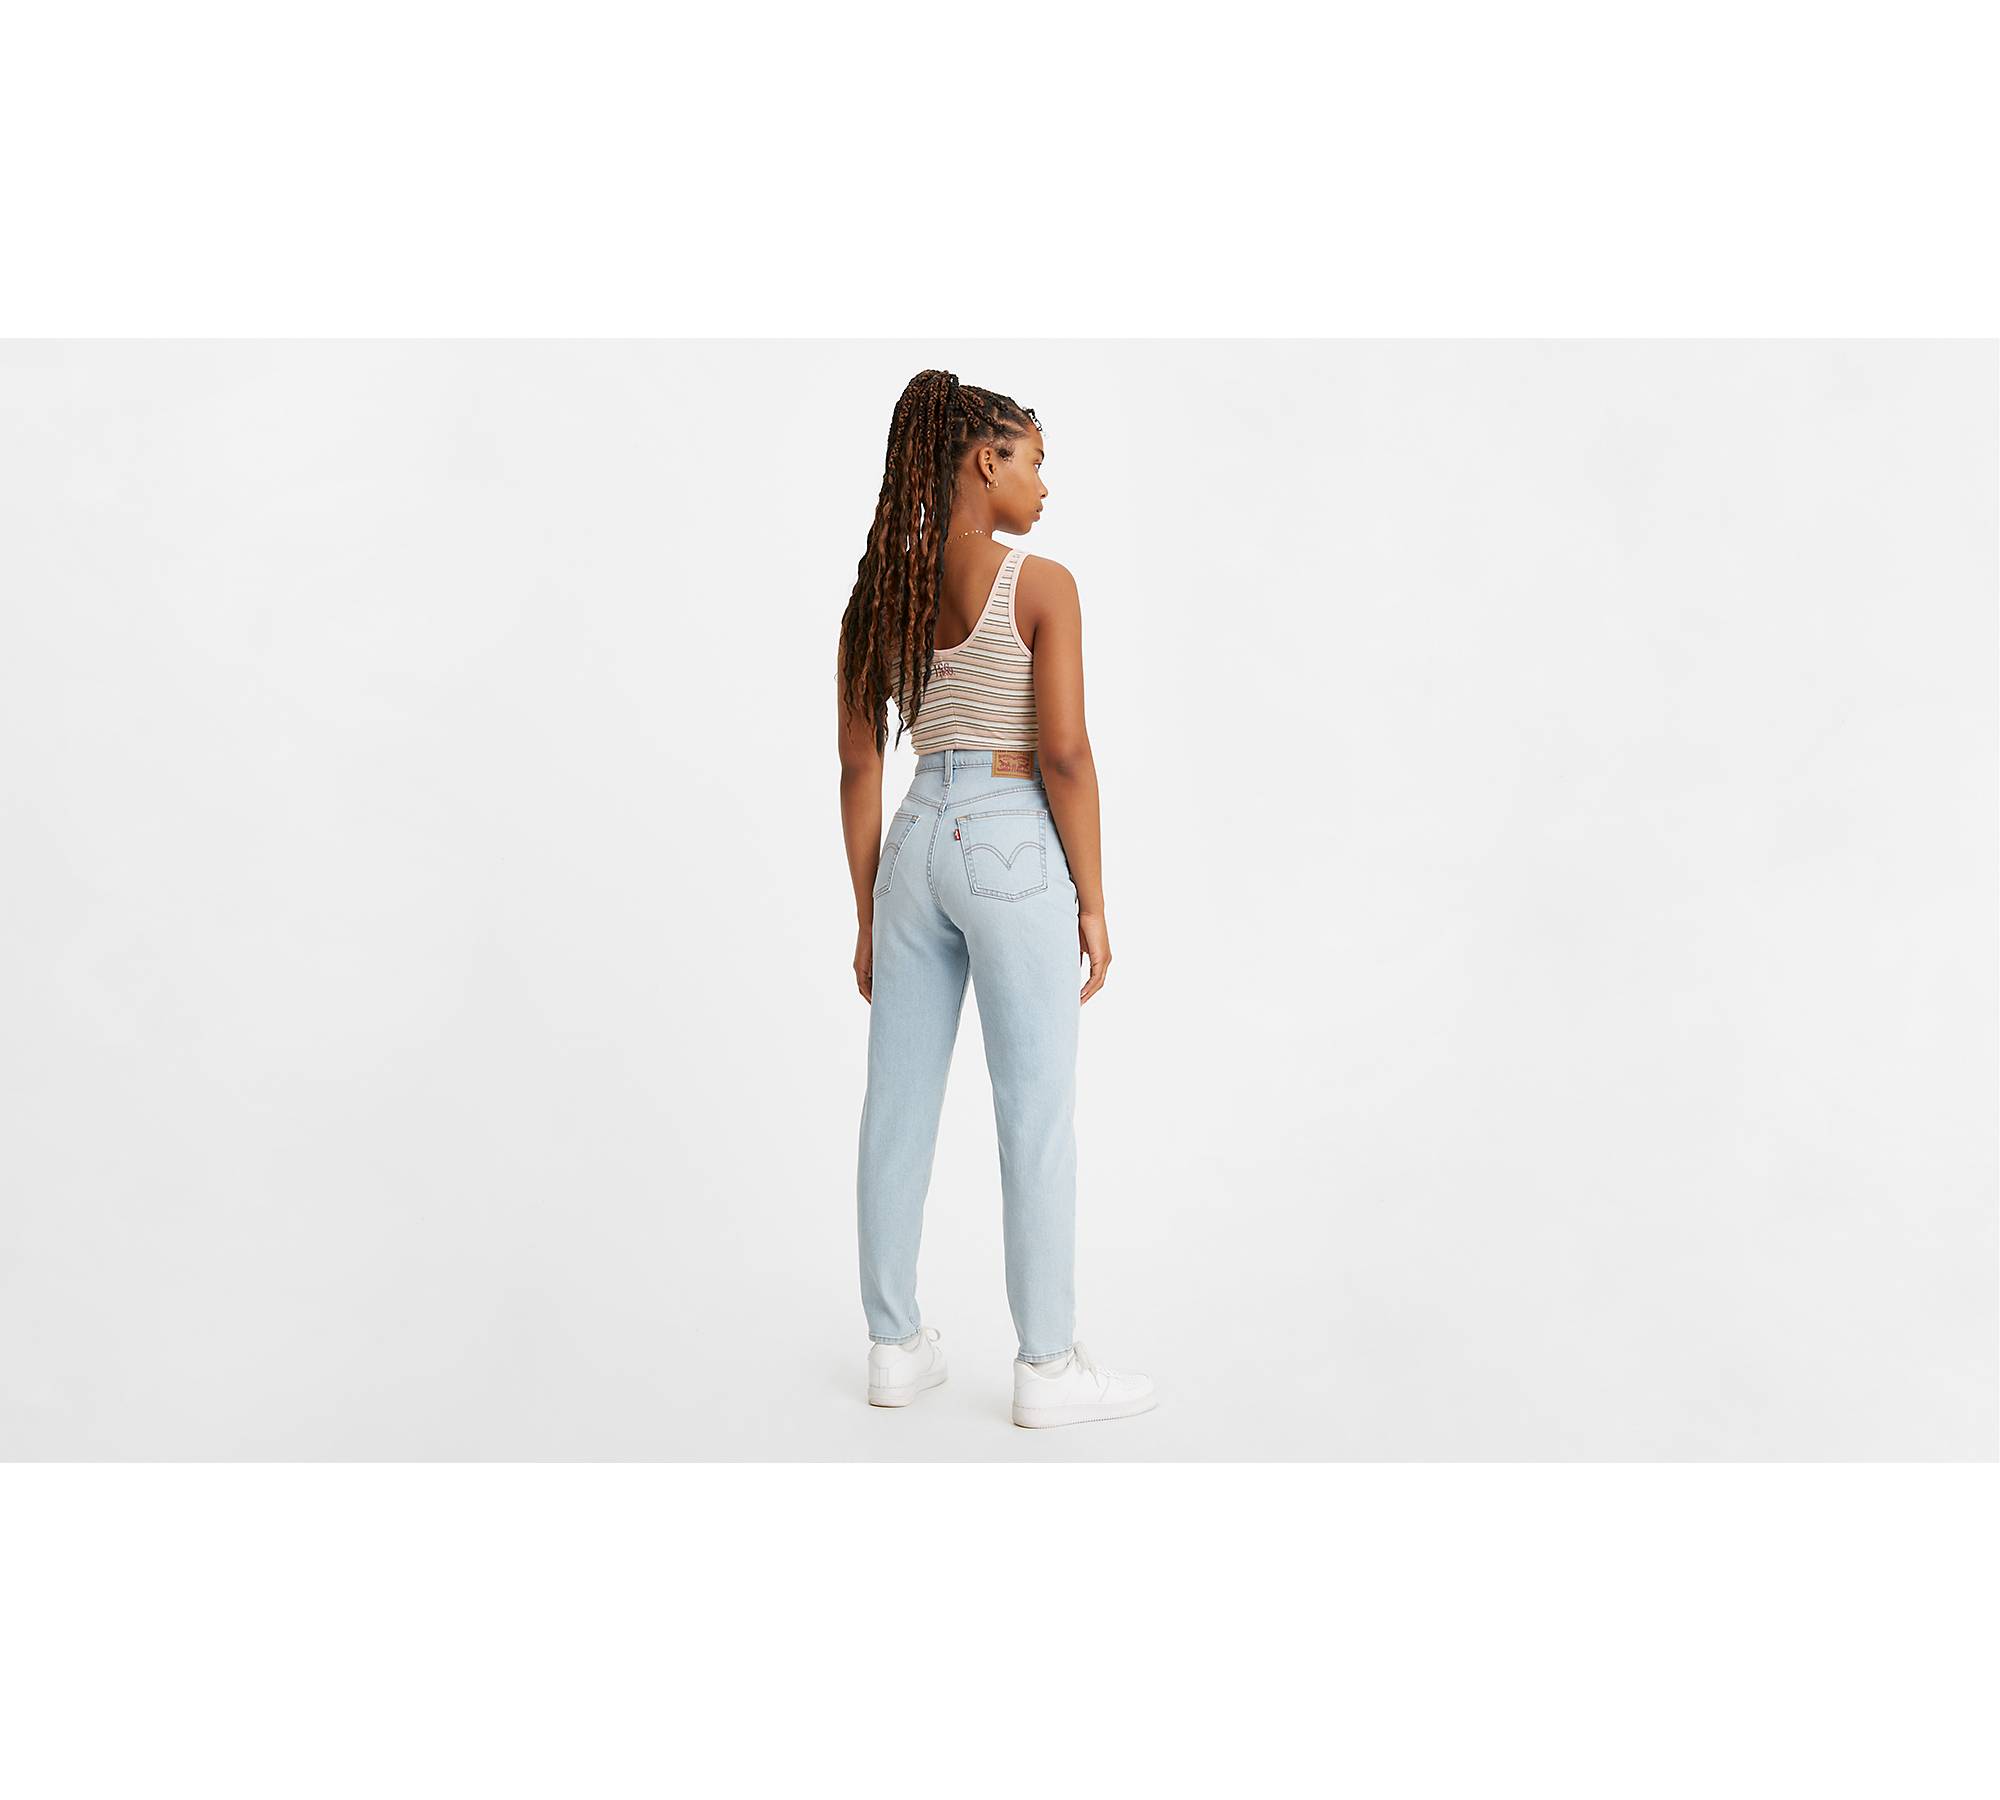 Levi's High-Waisted Taper Jeans Size 26 - $35 (68% Off Retail